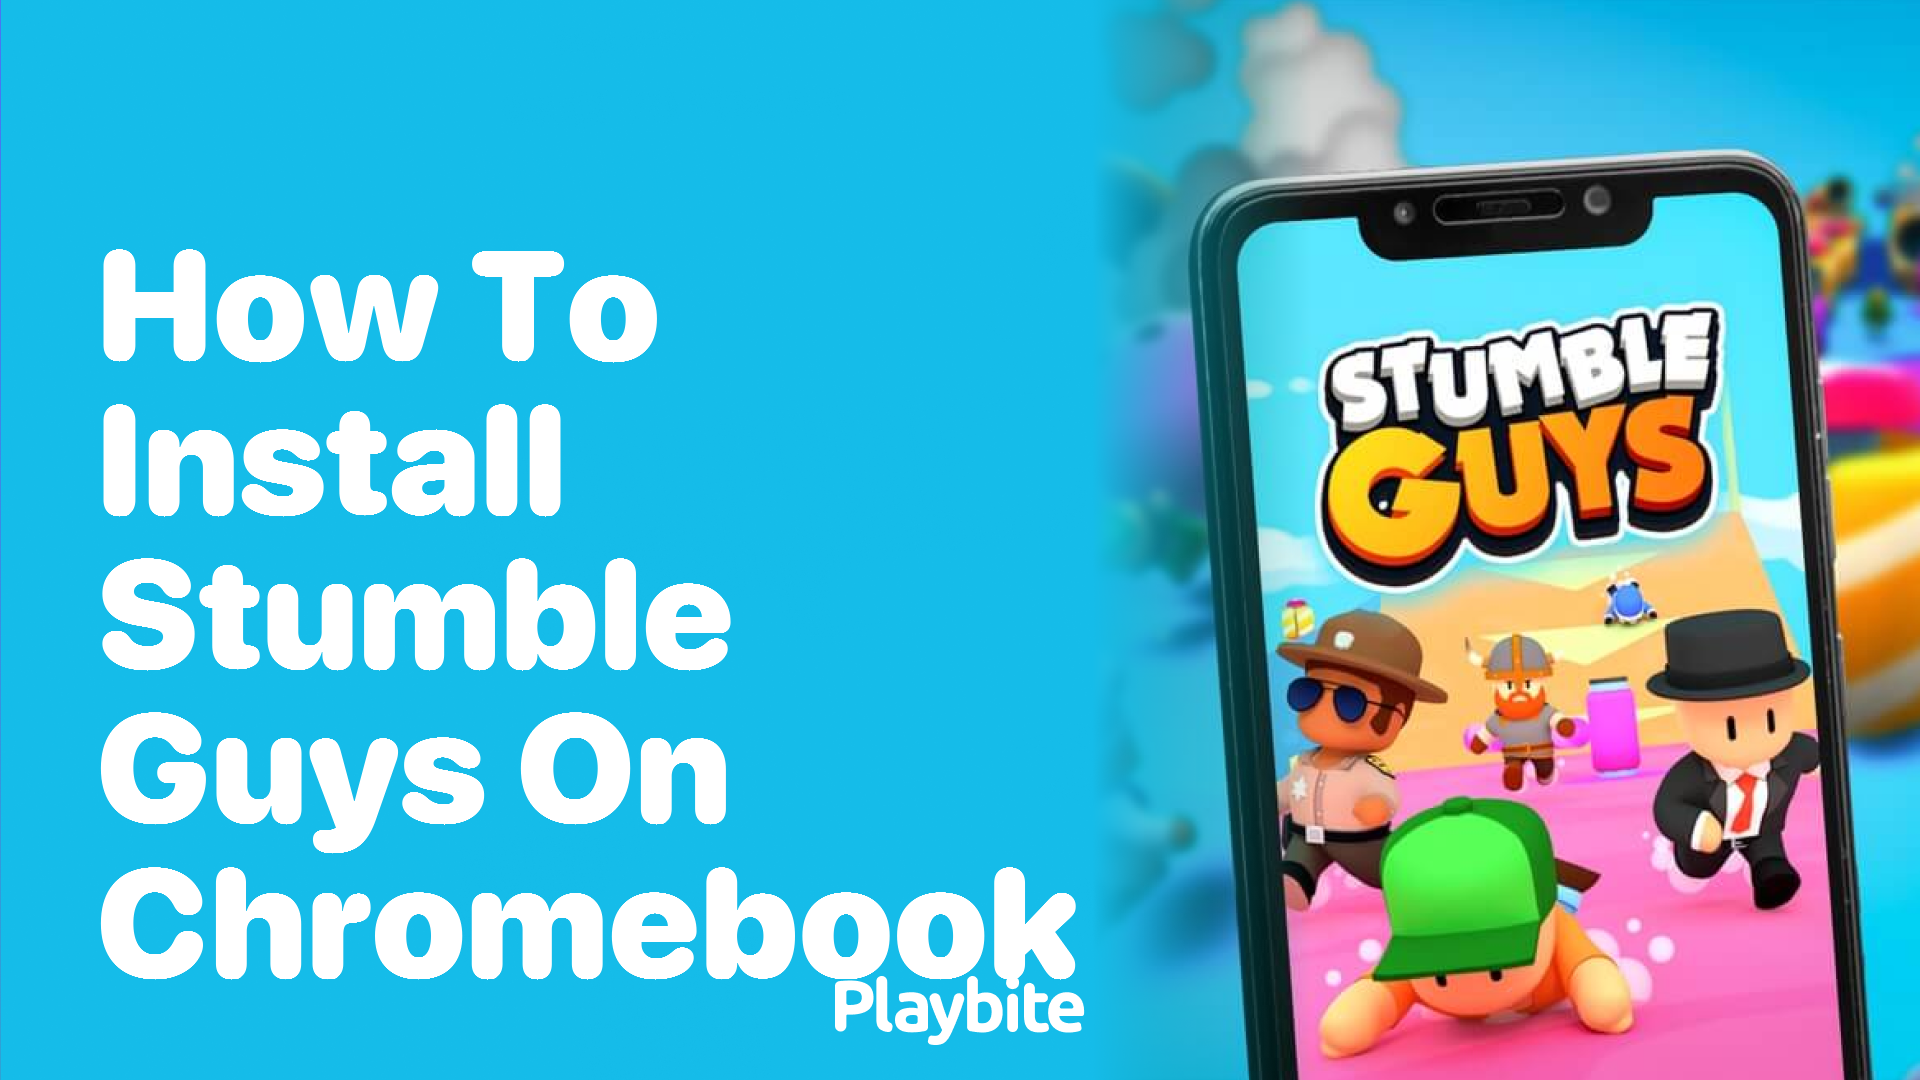 How to Install Stumble Guys on a Chromebook